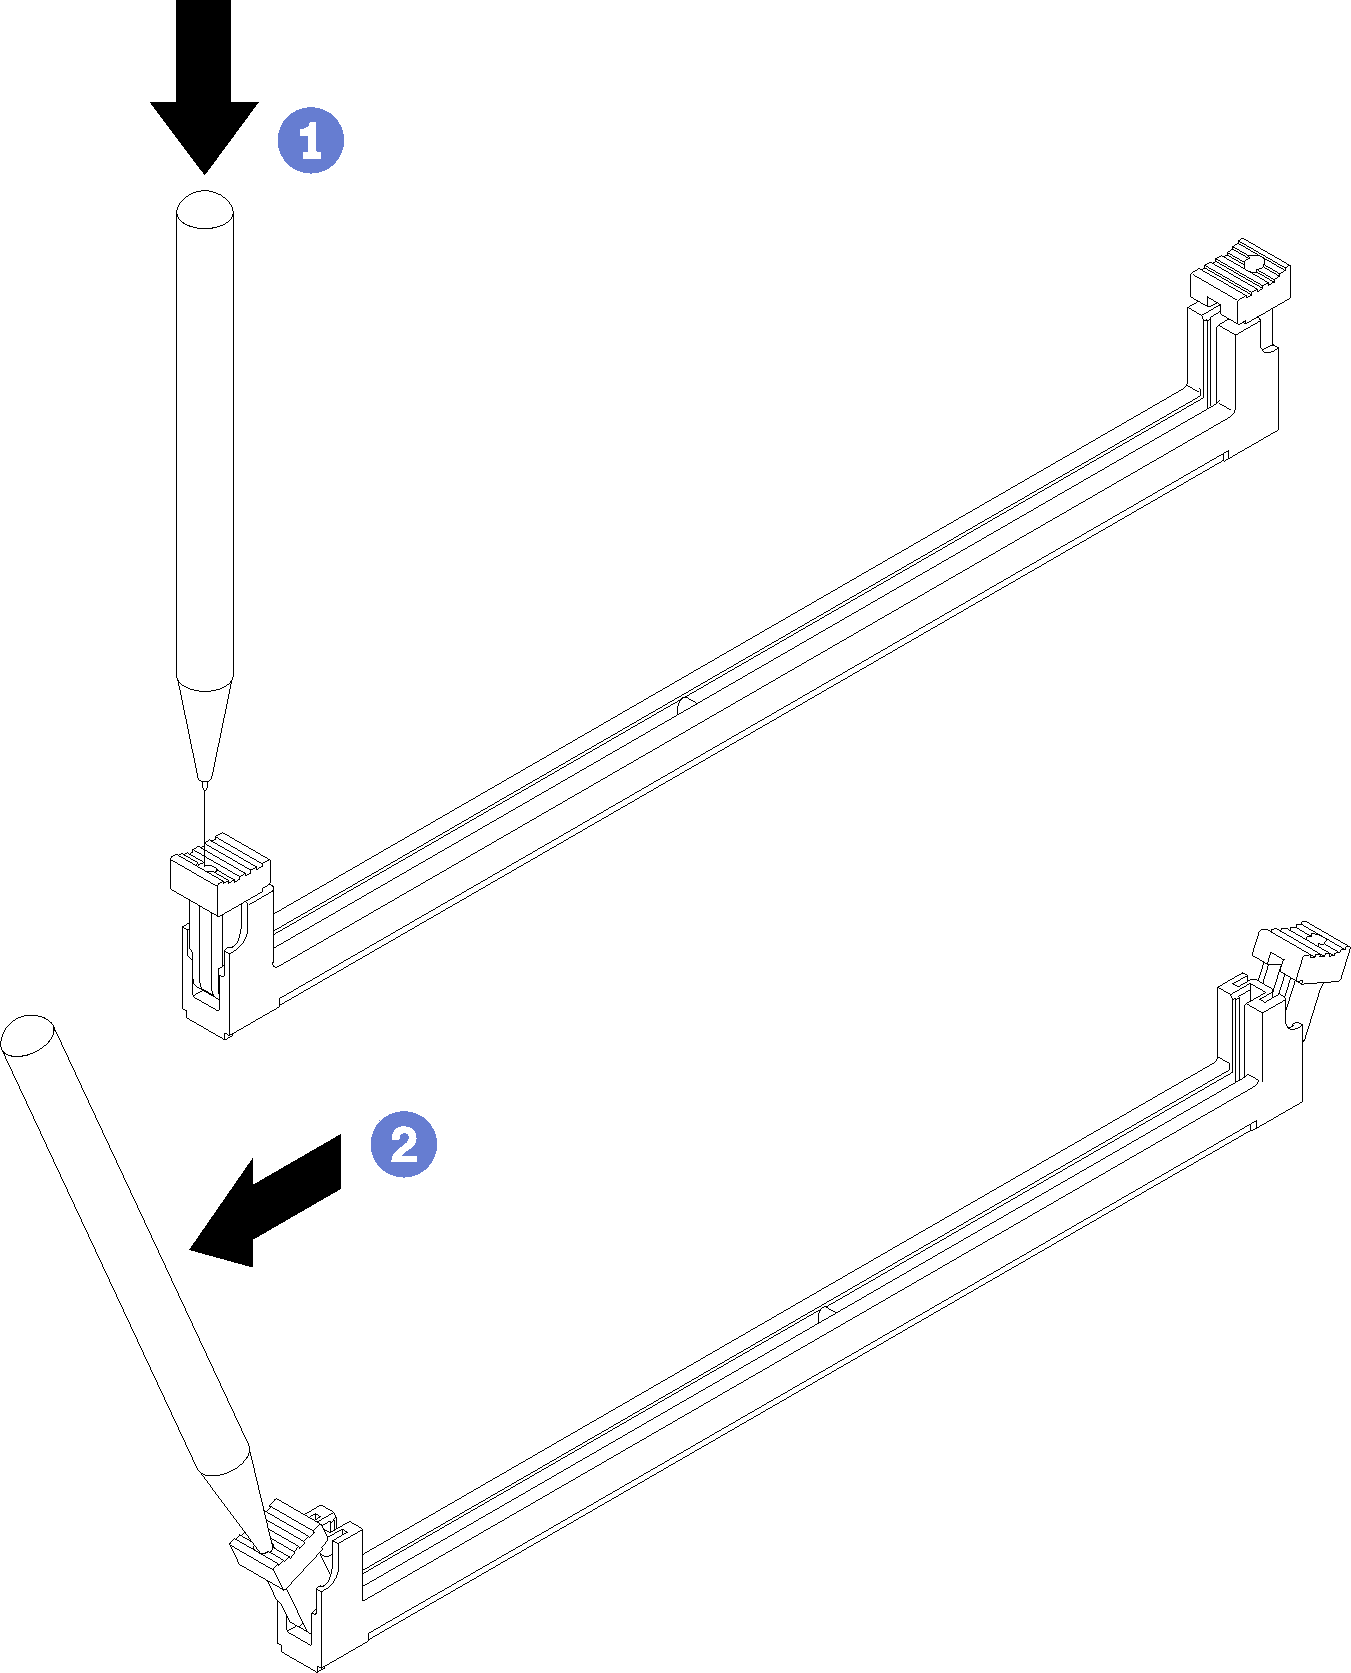 Opening retaining clips